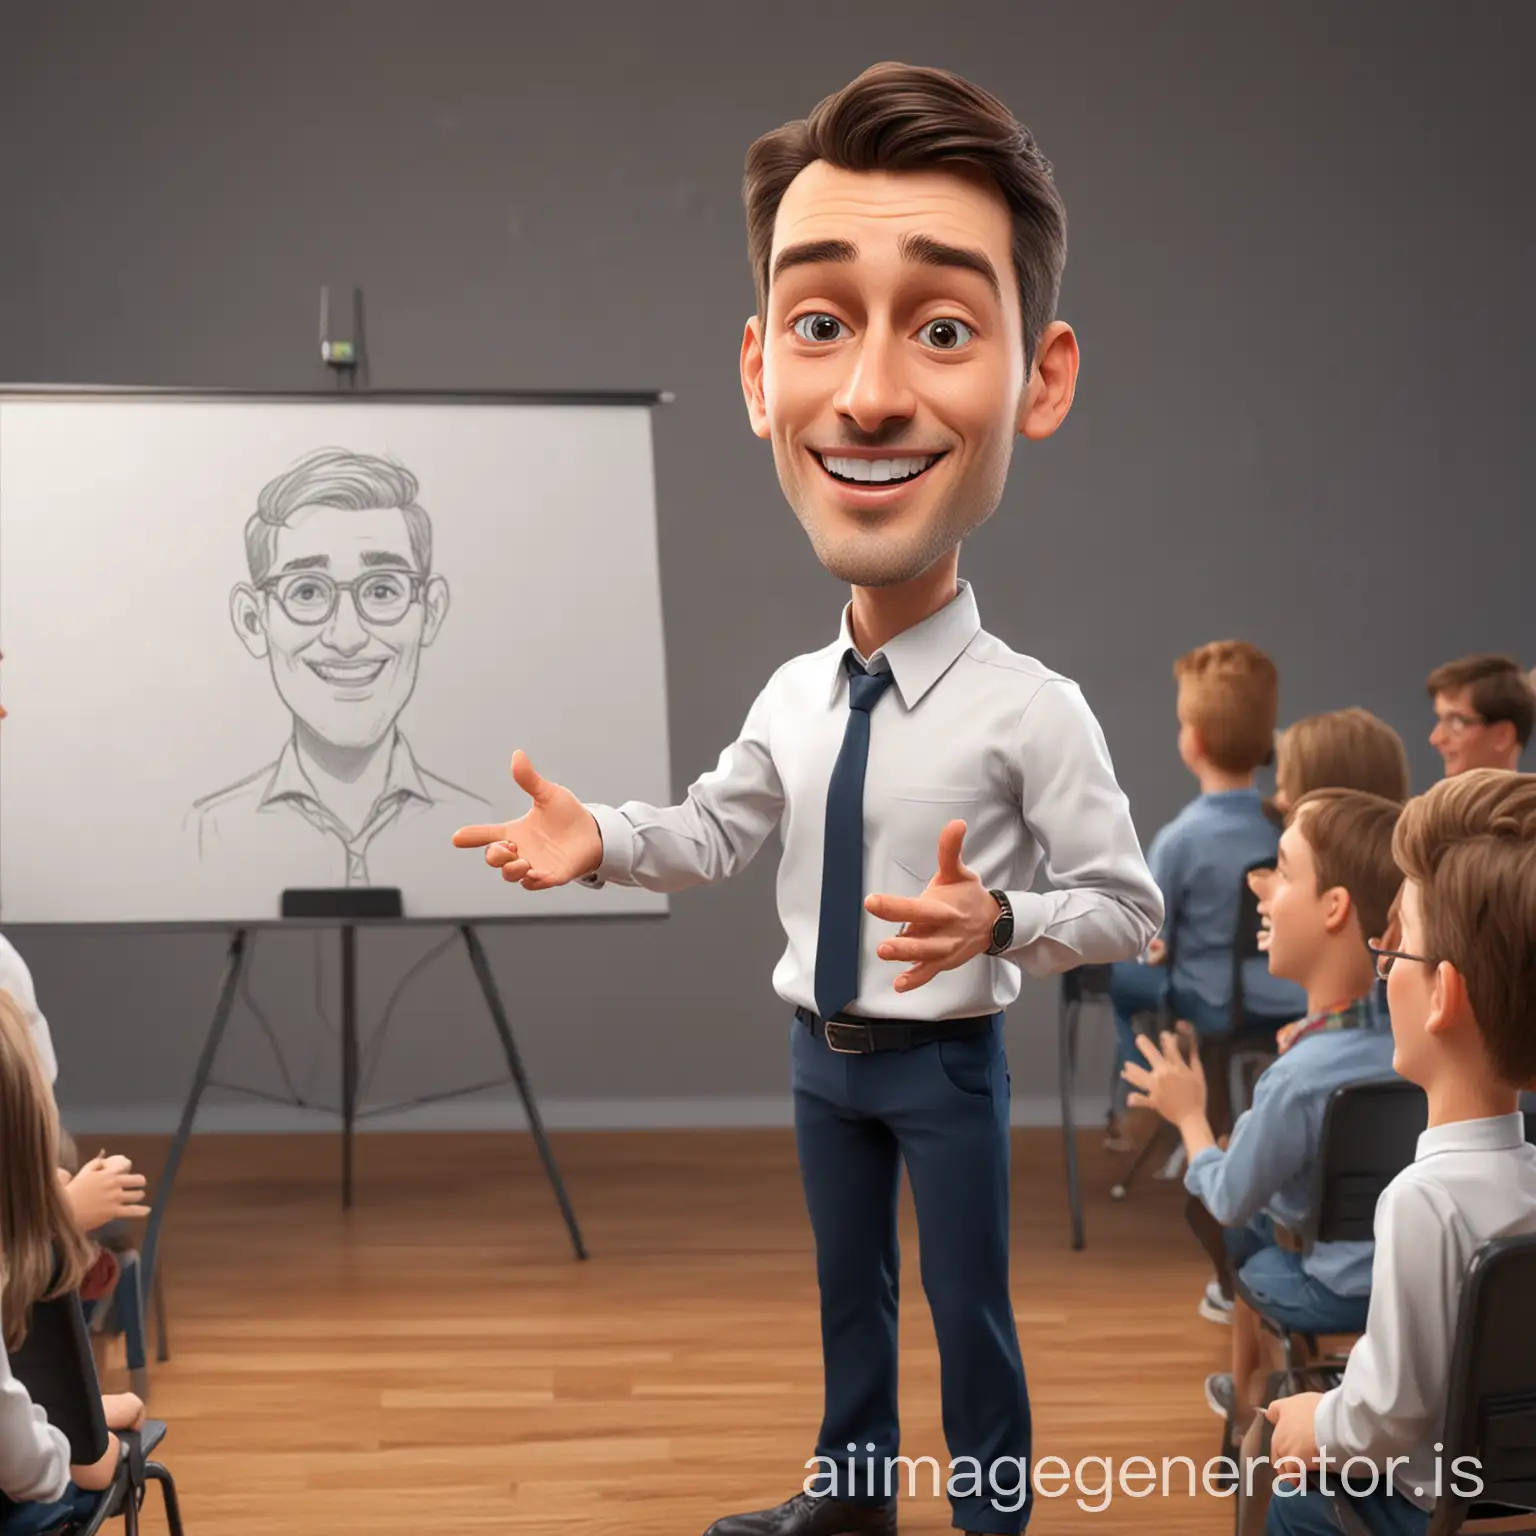 Create for me a 4d AI character caricature of a handsome man giving a presentation in front of a class